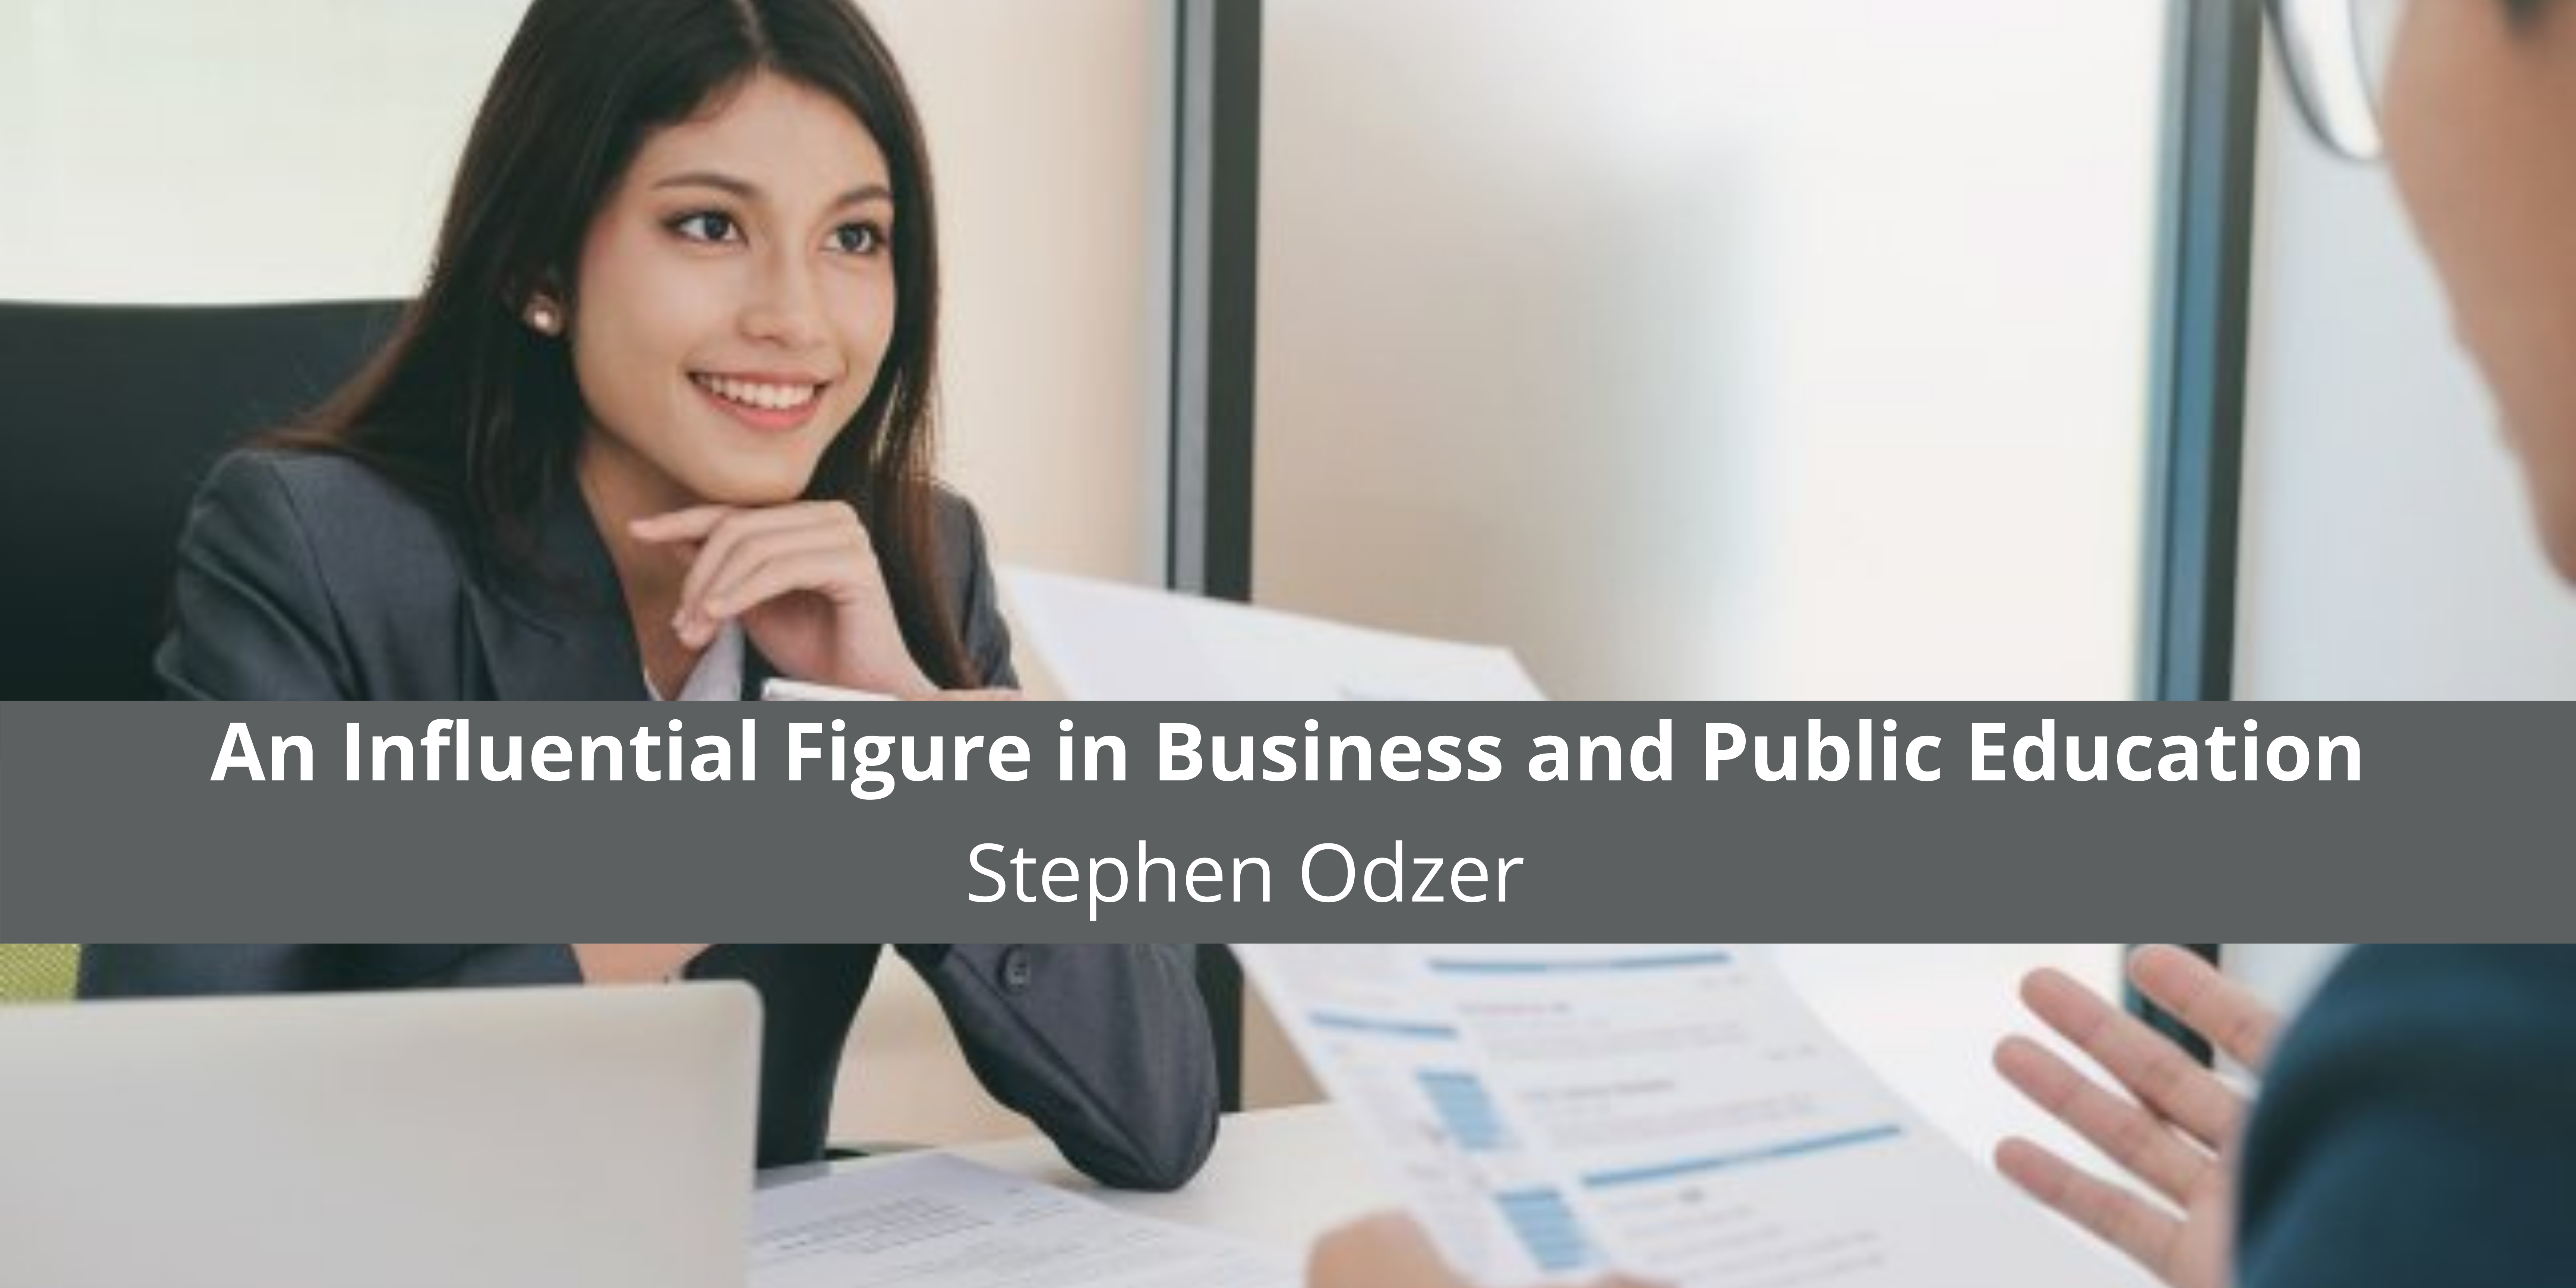 Stephen Odzer: An Influential Figure in Business and Public Education